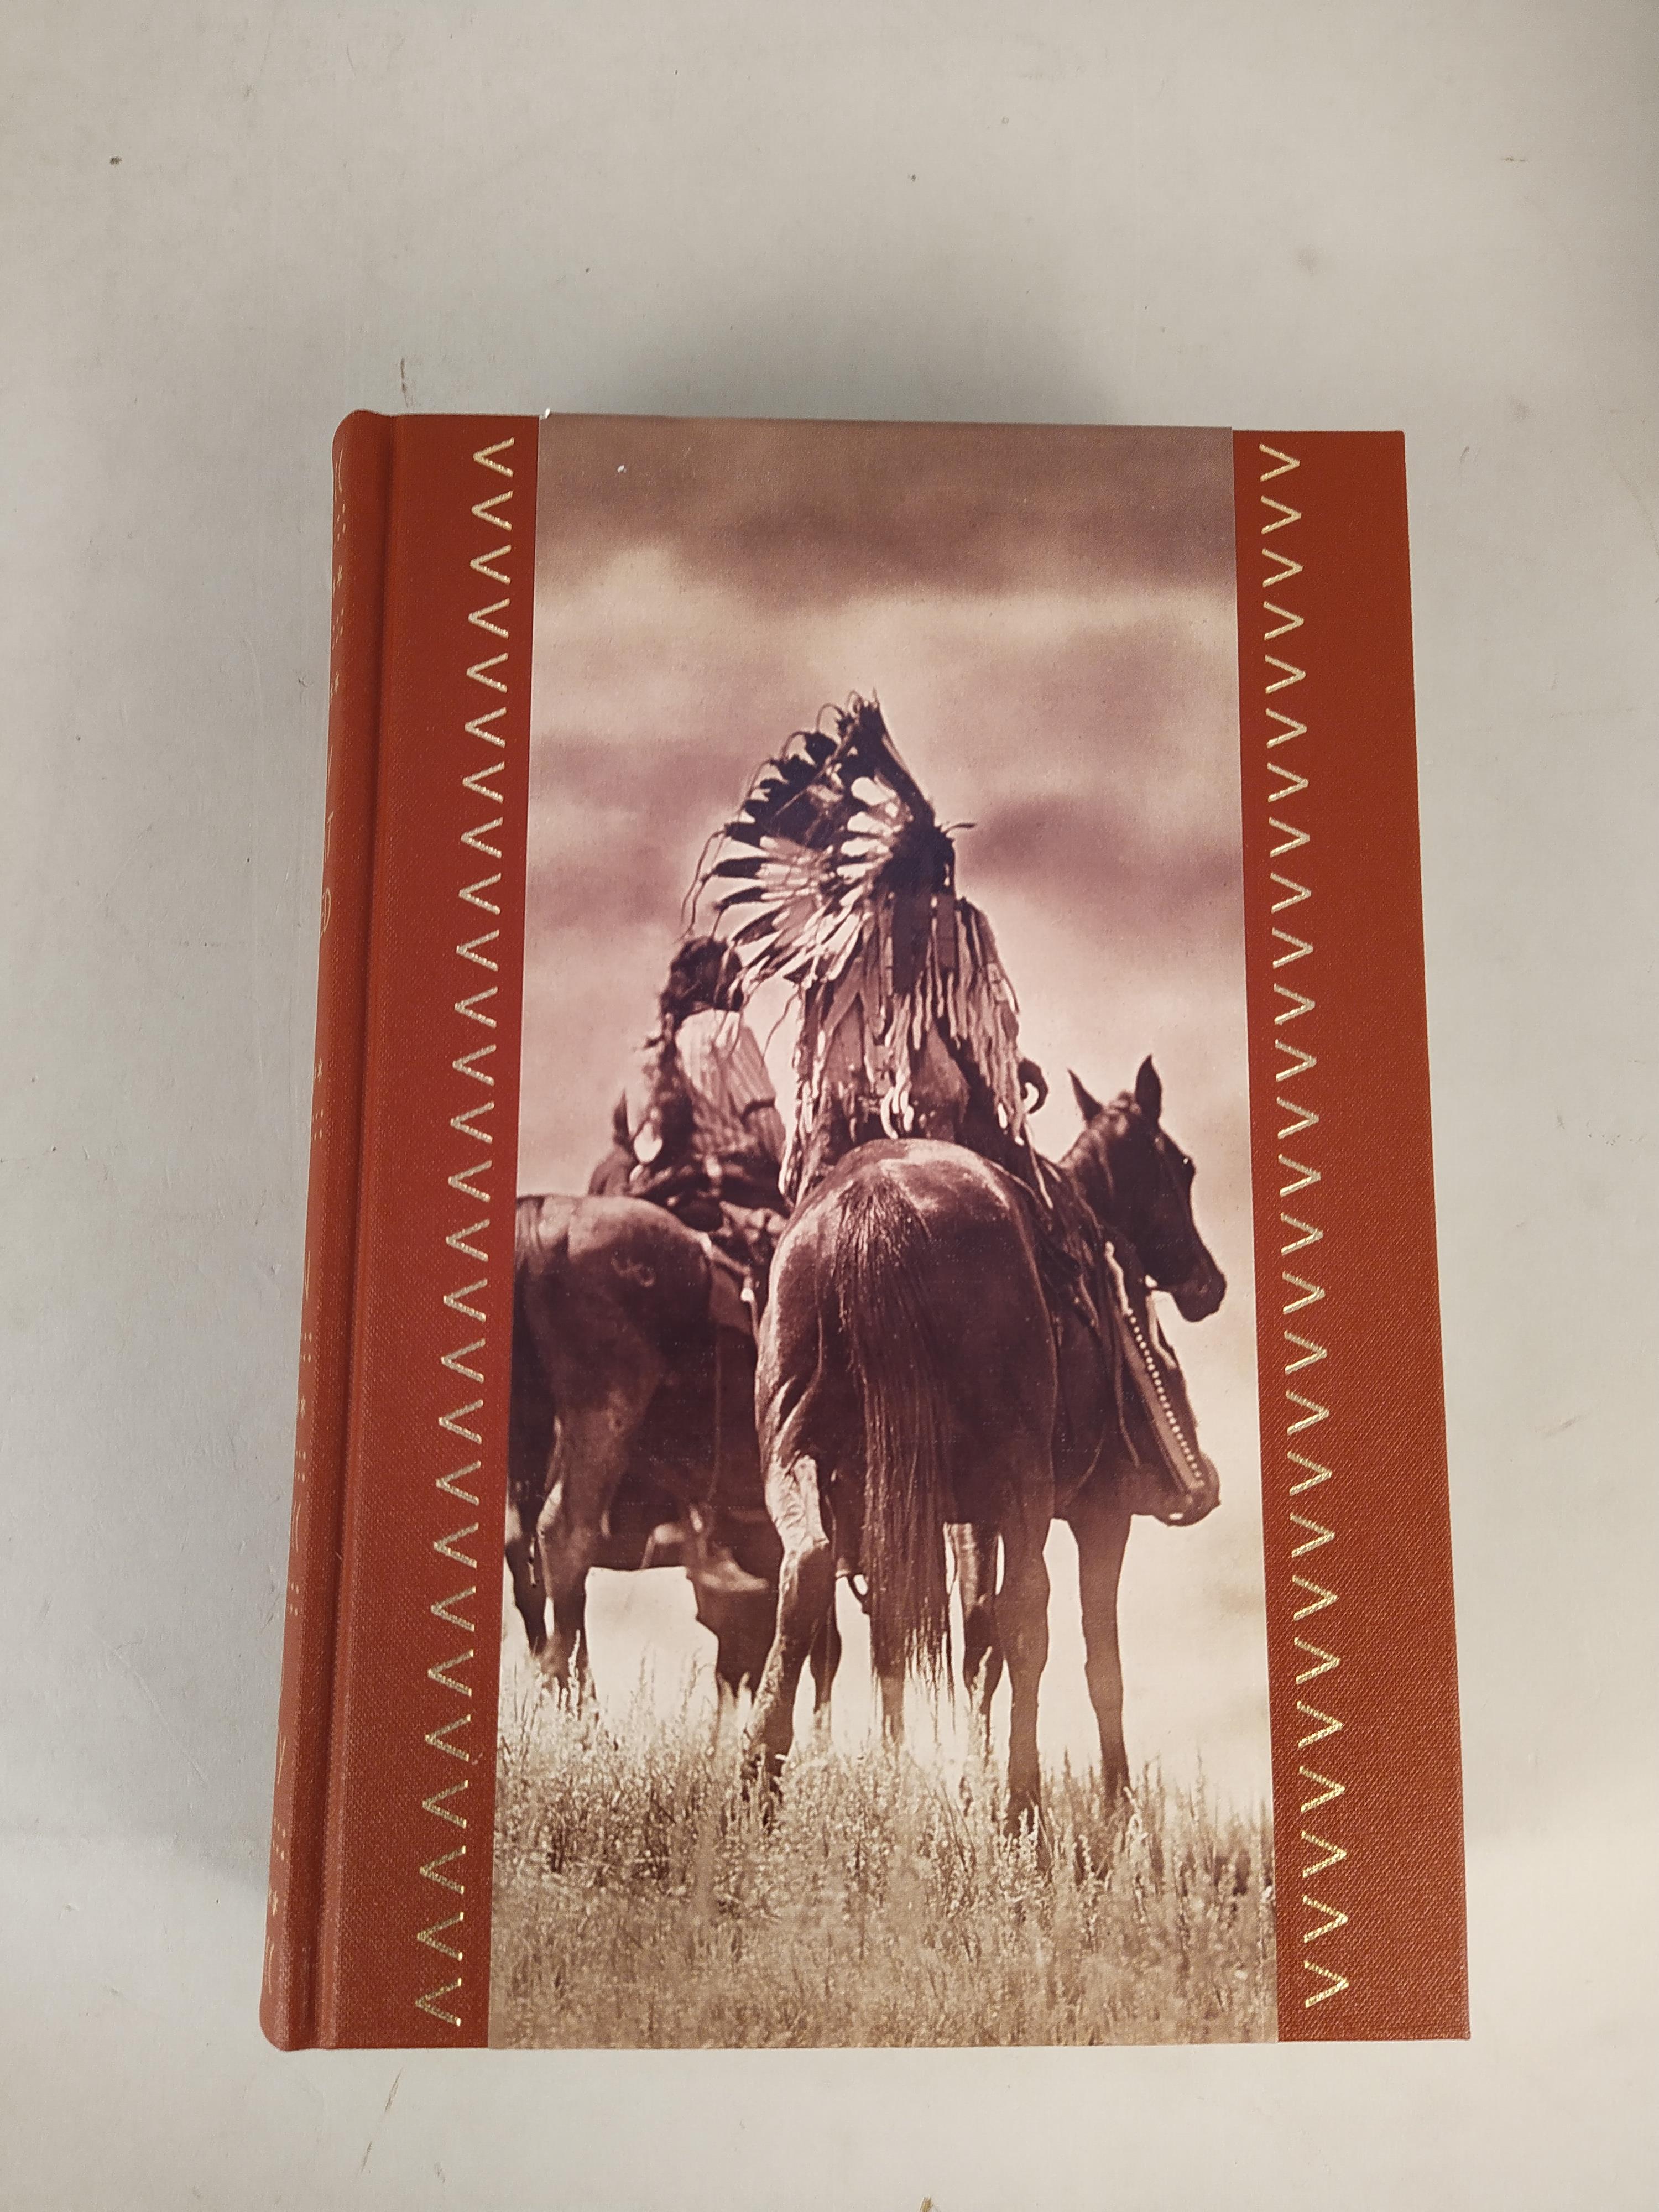 A Folio Society volume (in sleeve) 'Bury my Heart at Wounded Knee' by Dee Brown plus 'History of - Image 6 of 6